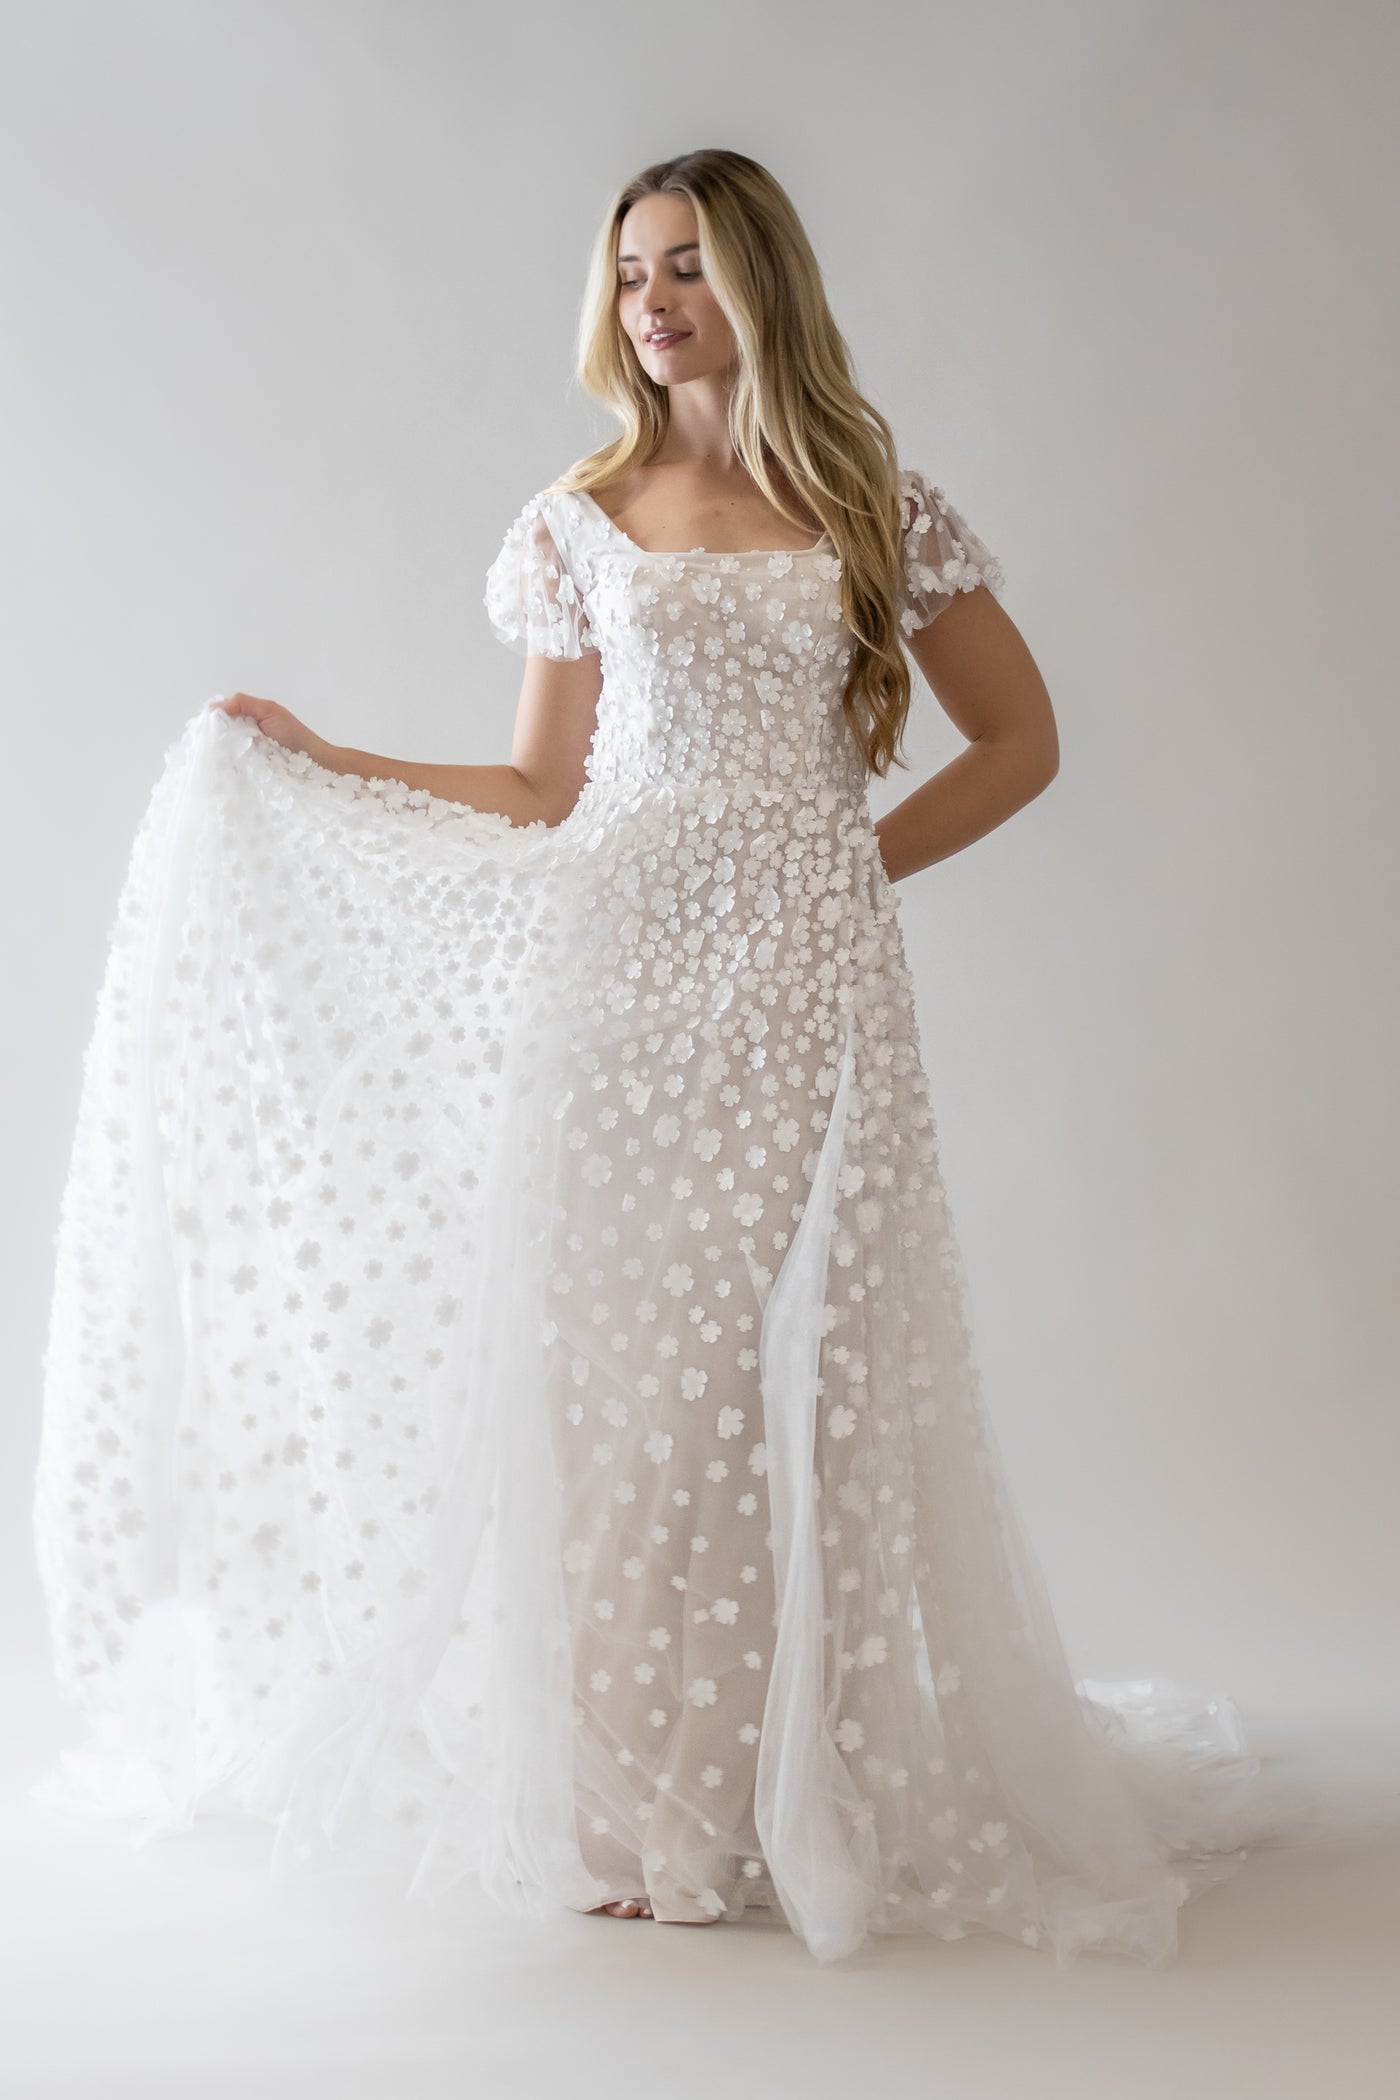 This is a modest wedding dress with  3D floral applique along the entire bodice and also features a puff sleeve.